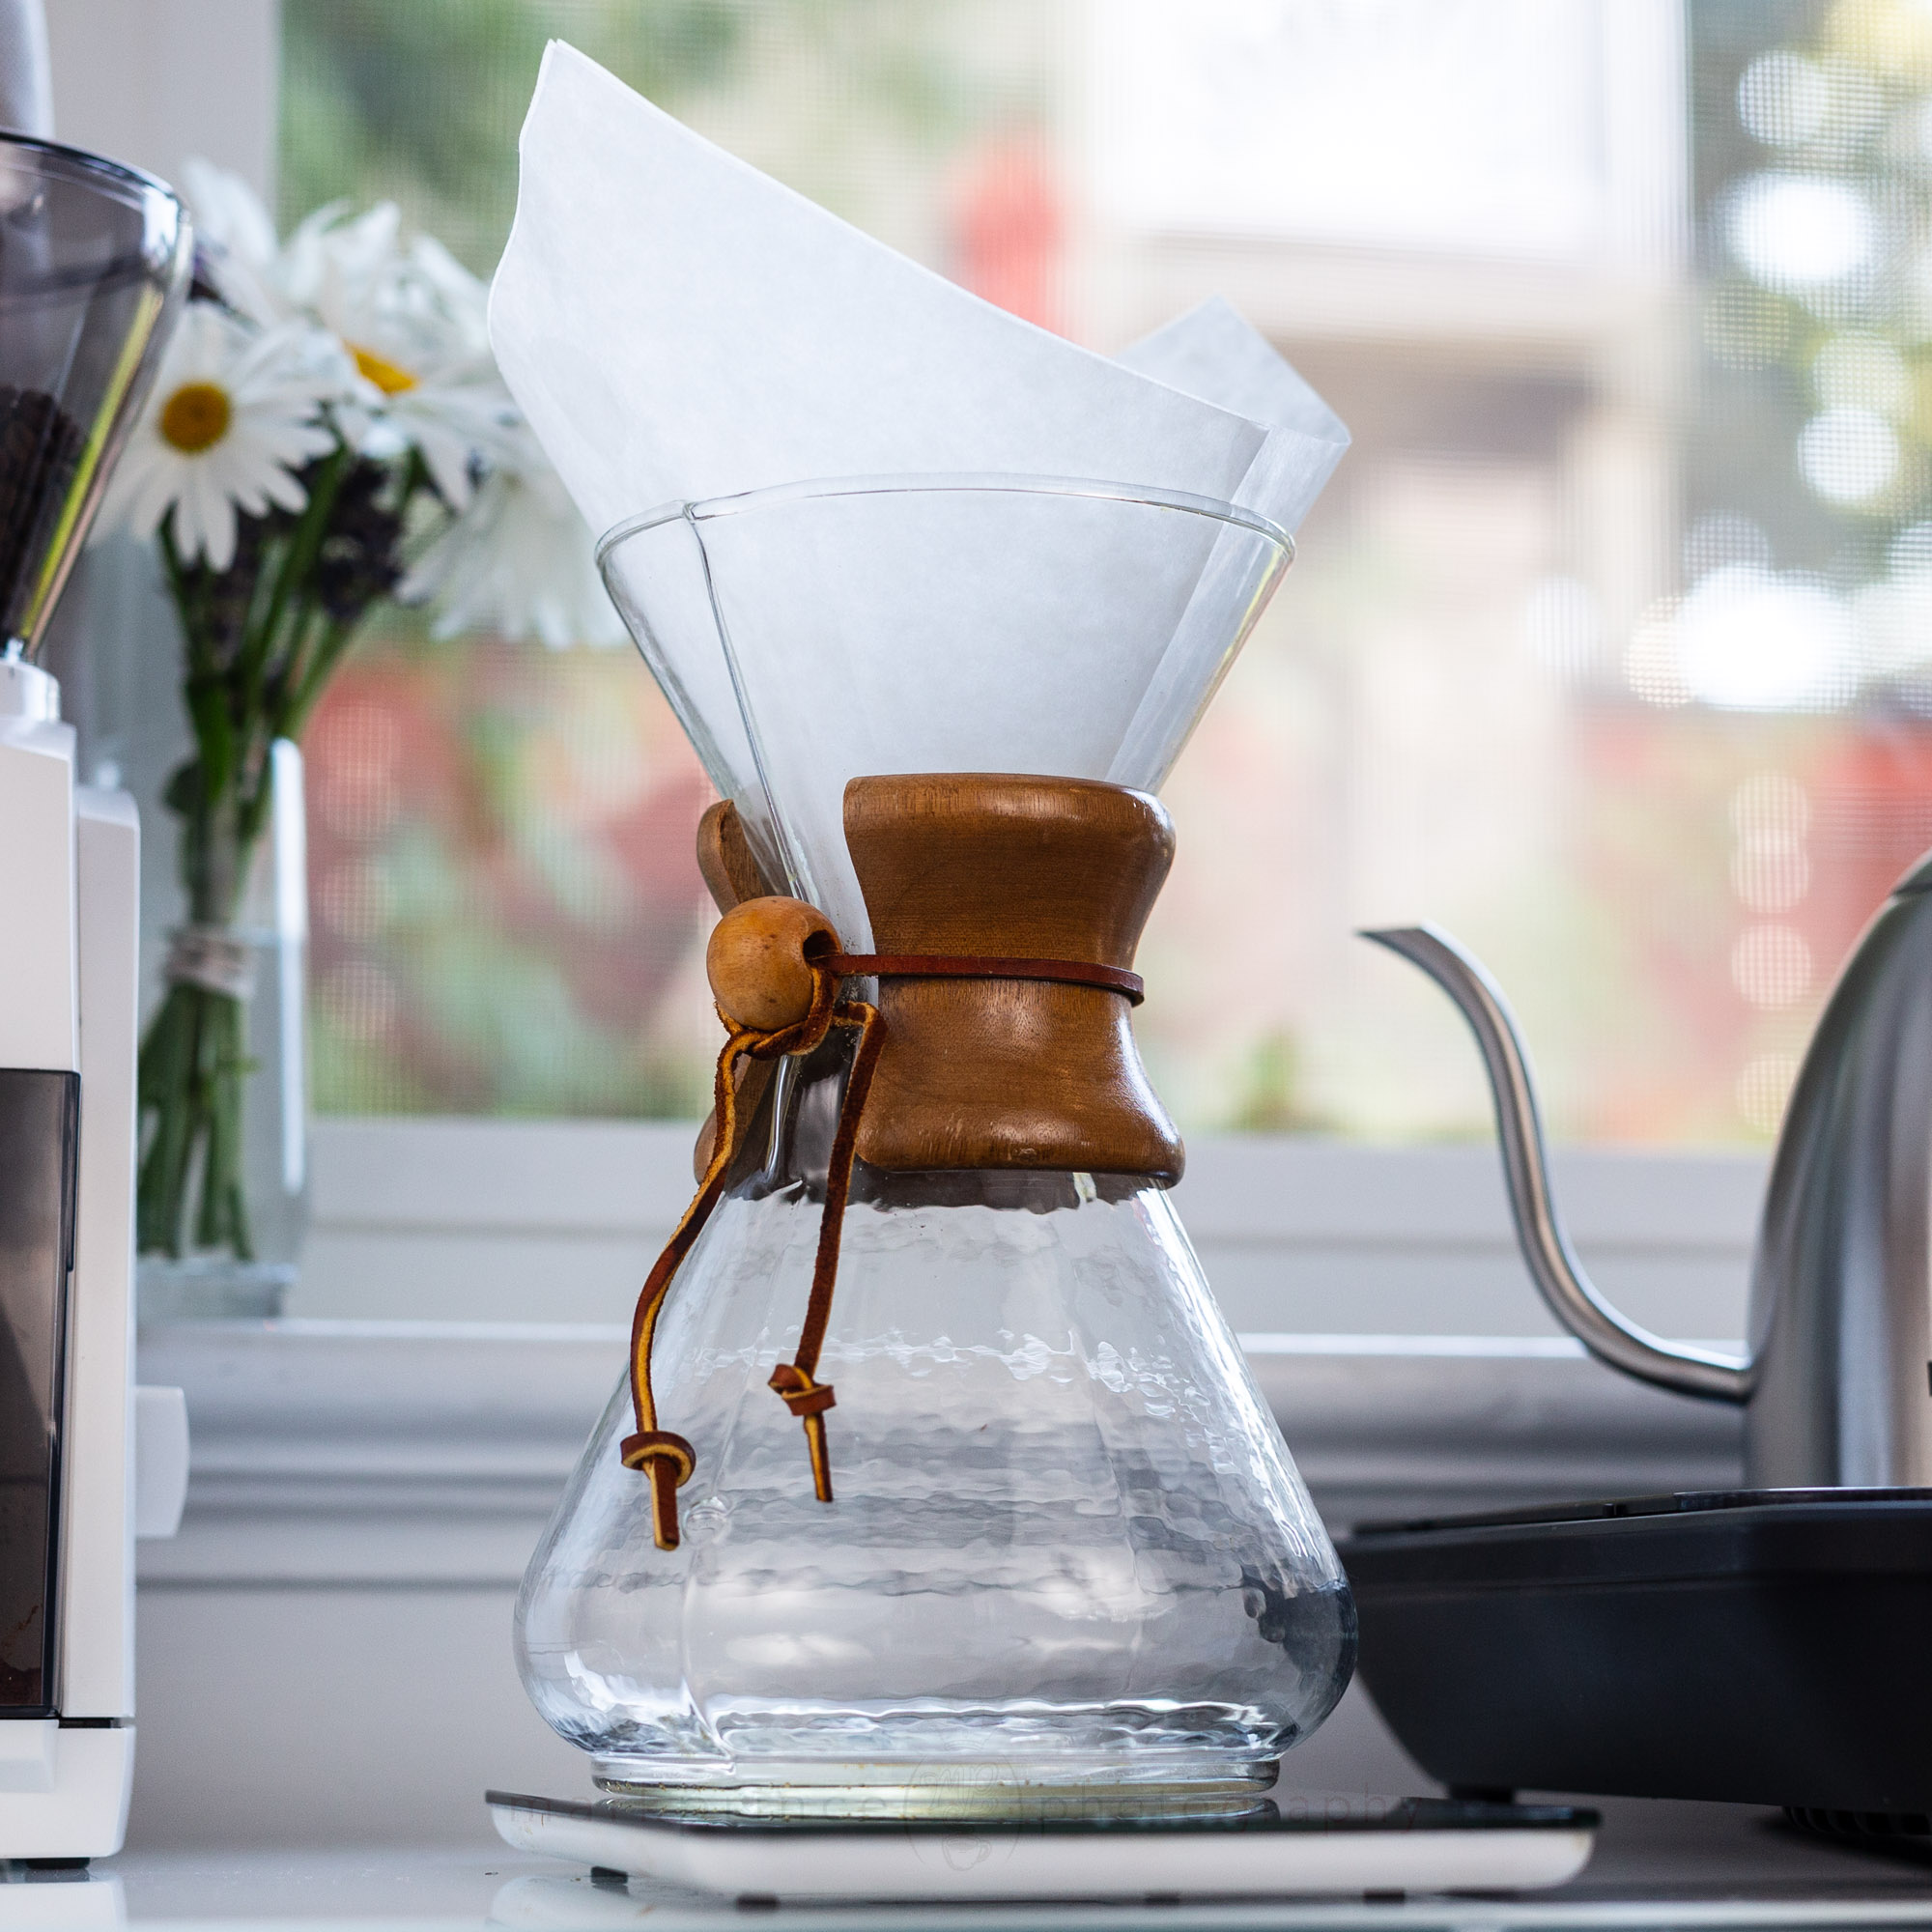 Pour Over History and Development » CoffeeGeek